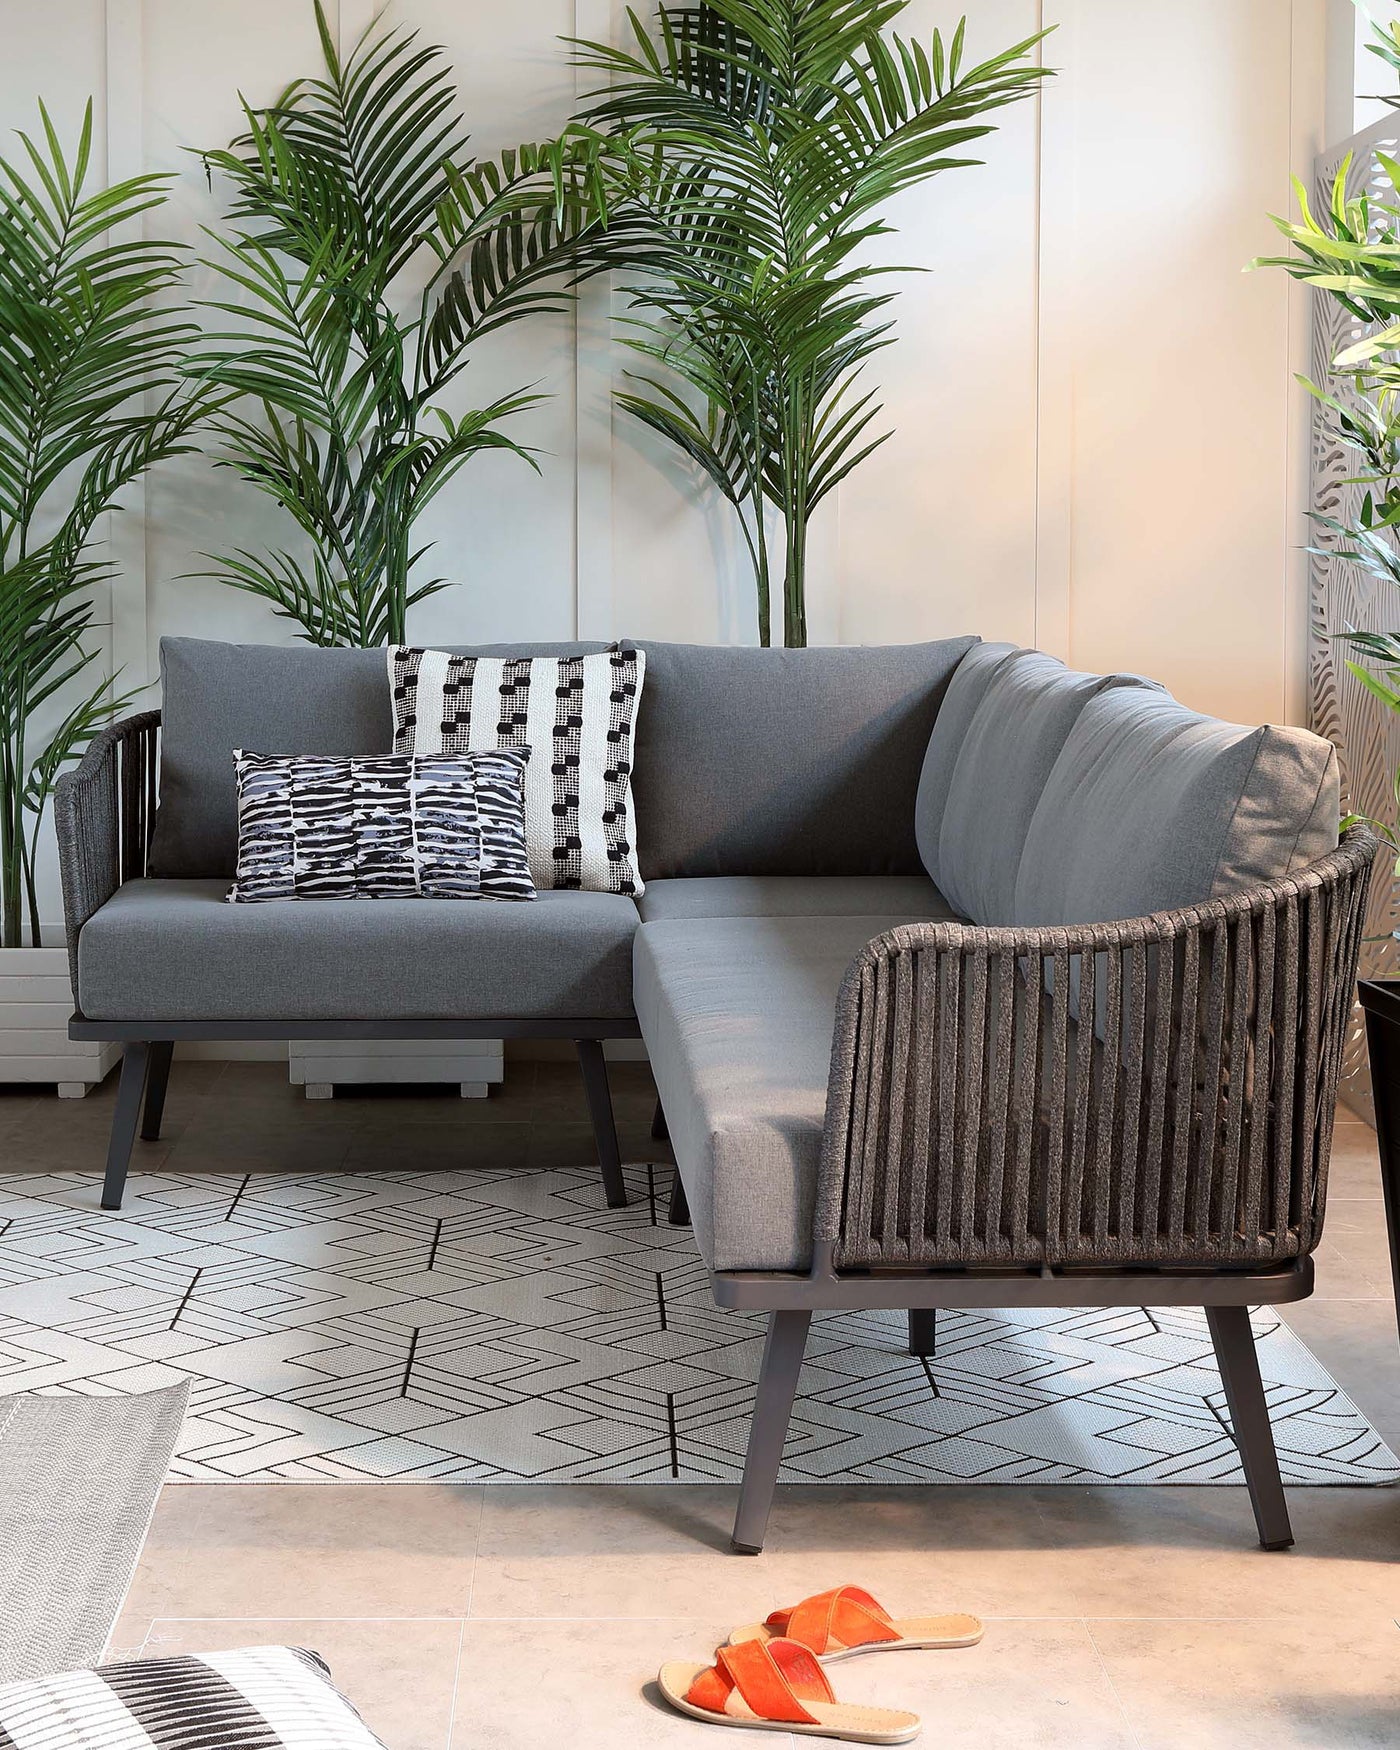 Modern charcoal grey sofa with clean lines and a textured weave, featuring dark wooden legs, complemented by an assortment of pillows in geometric and striped patterns. Partial view of a matching chair with a vertical rope back design and similar dark legs to the side of the sofa. The furniture is positioned on an area rug with a black and white geometric pattern, adding to the contemporary aesthetic. Decorative green potted plants create a natural backdrop.